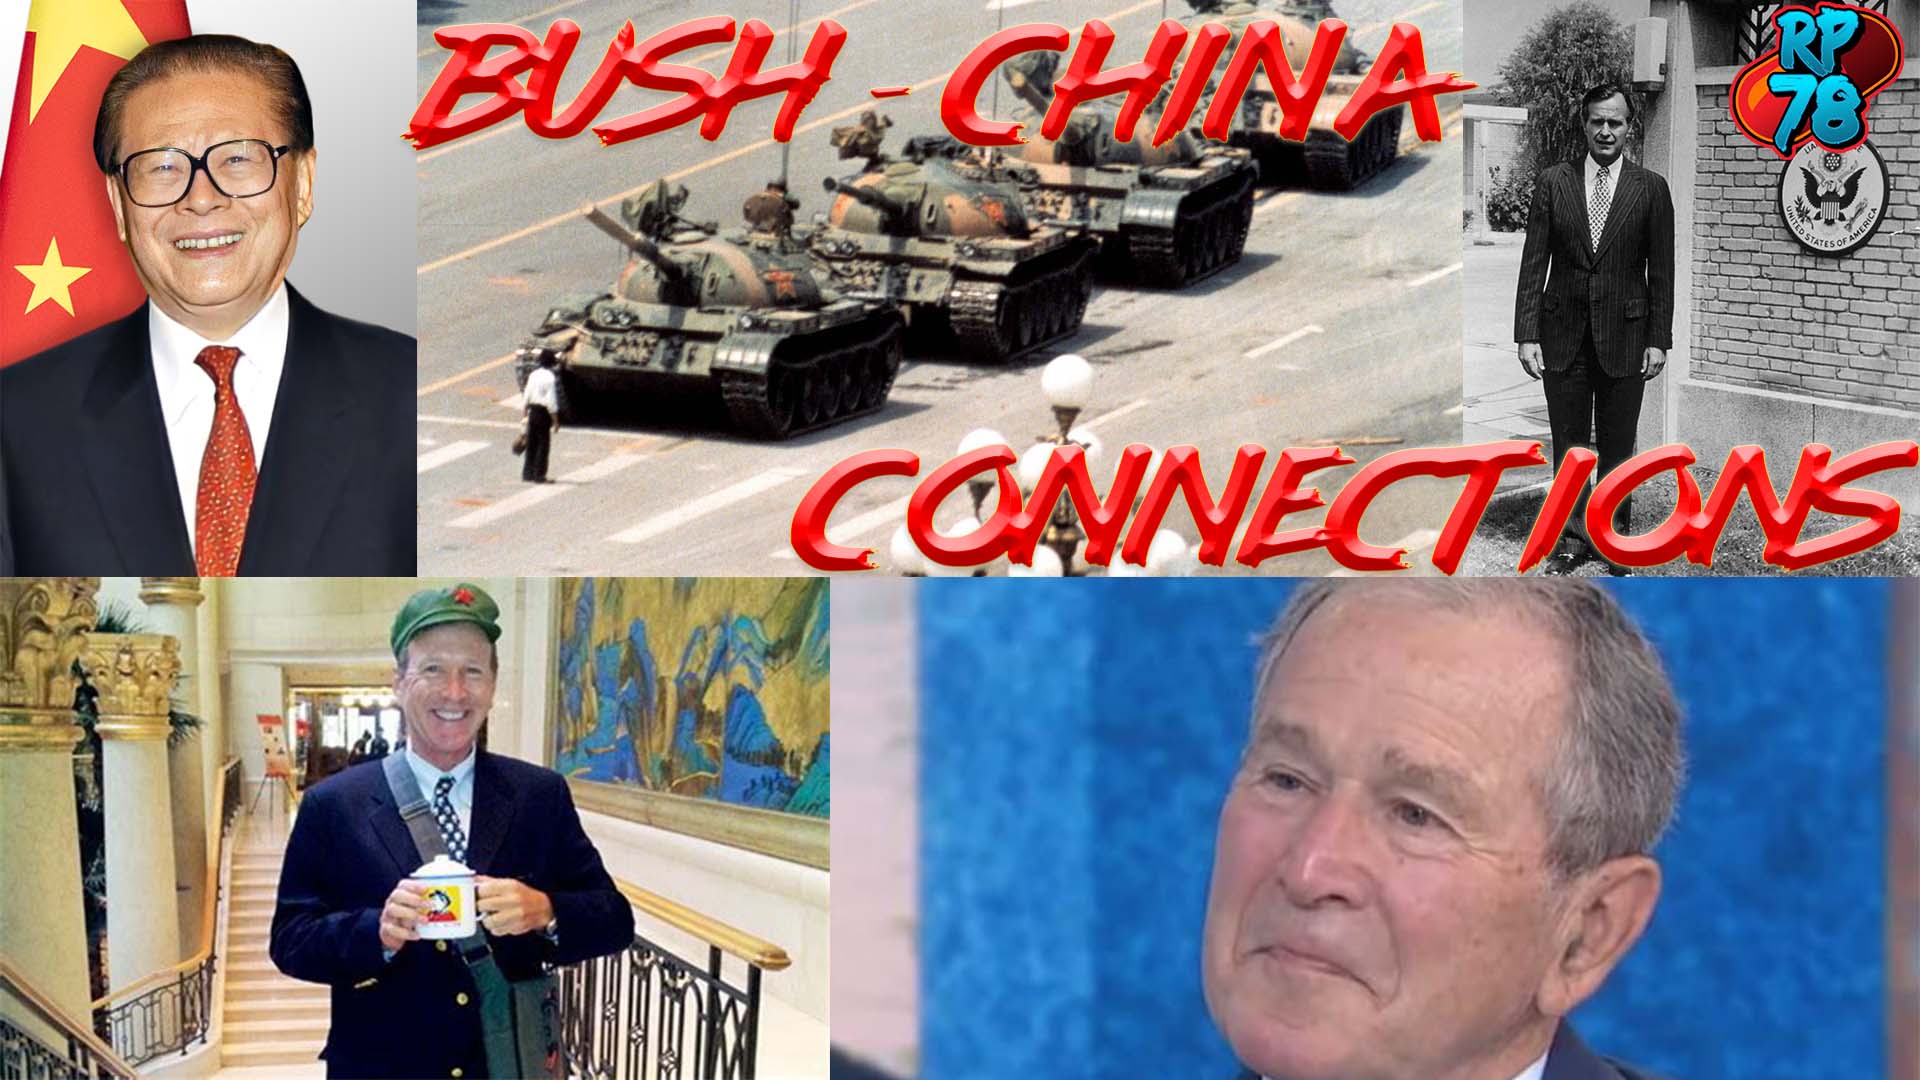 Serving Two Masters - The Bush Family & China